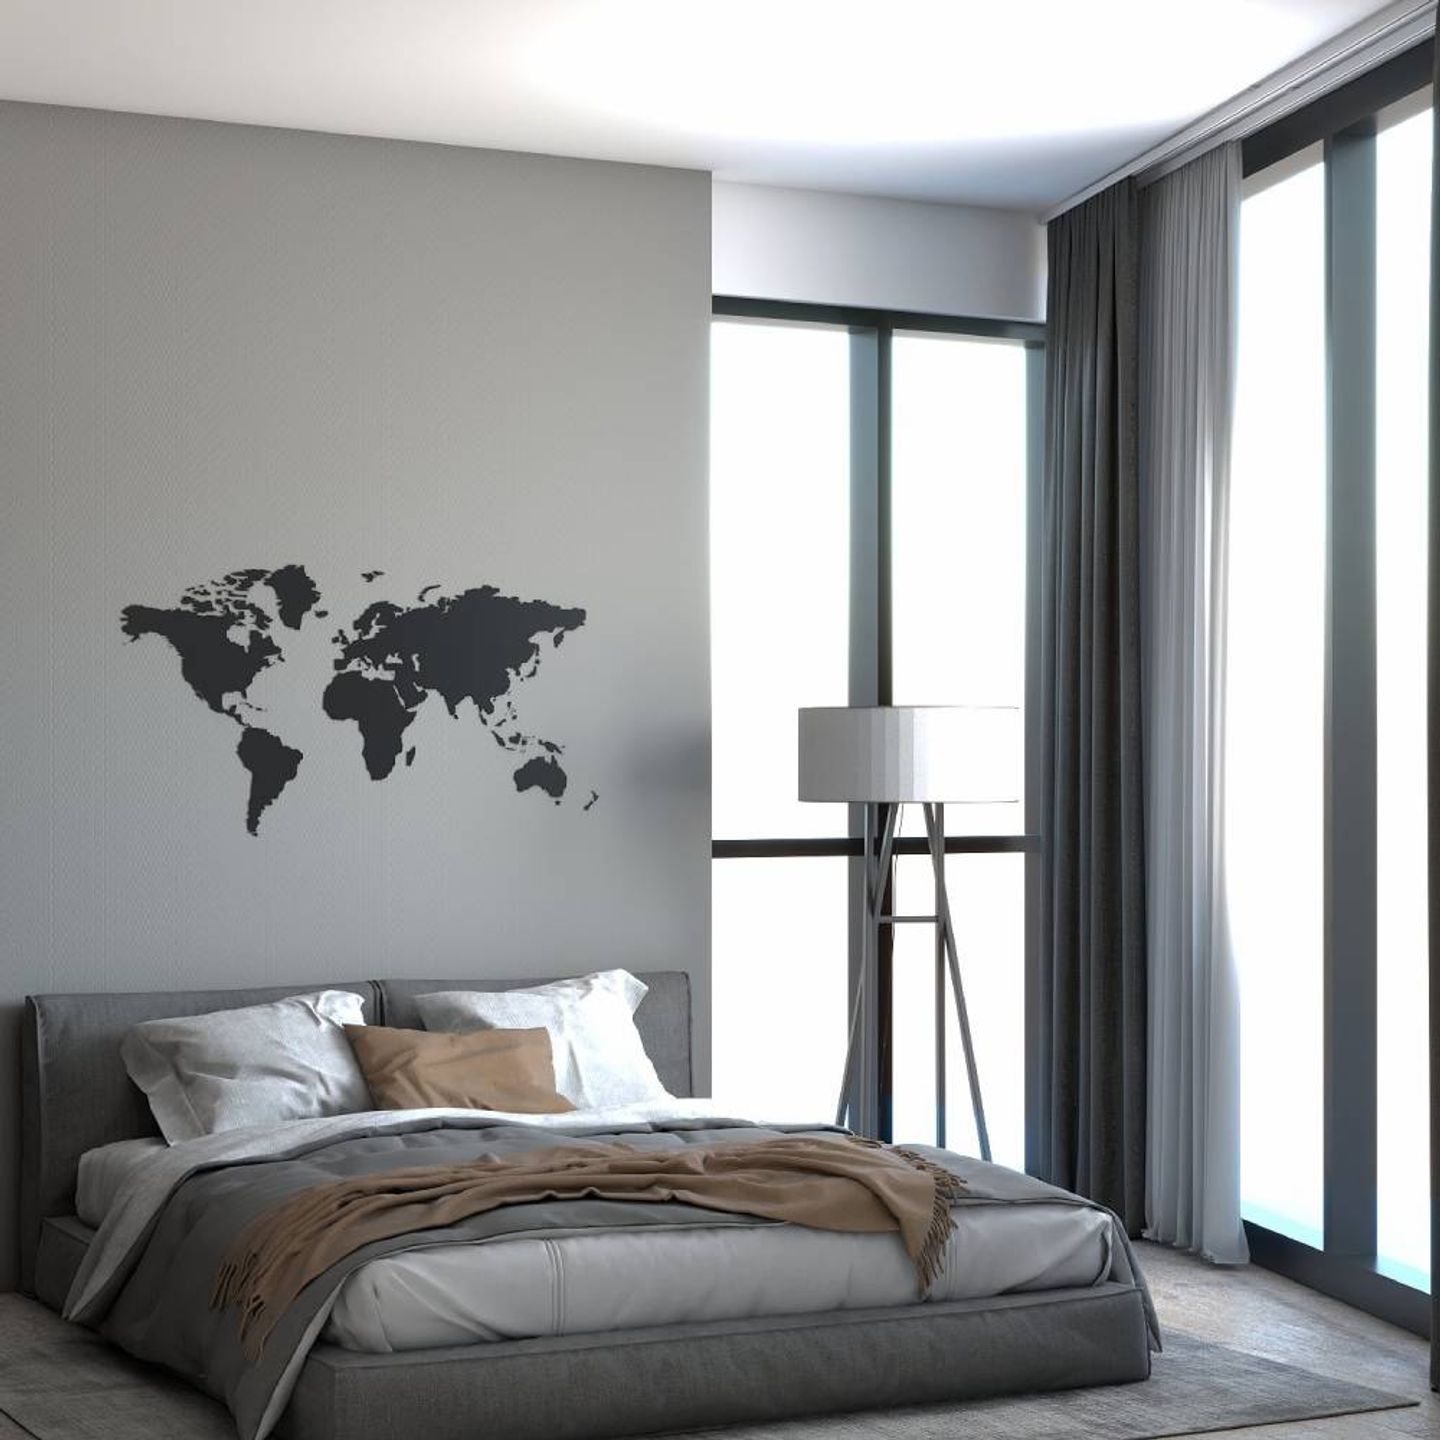 Grey Master Bedroom With Floor Bed, Grey Upholstery, Floor Lamp And World Map Wall Art - Livspace